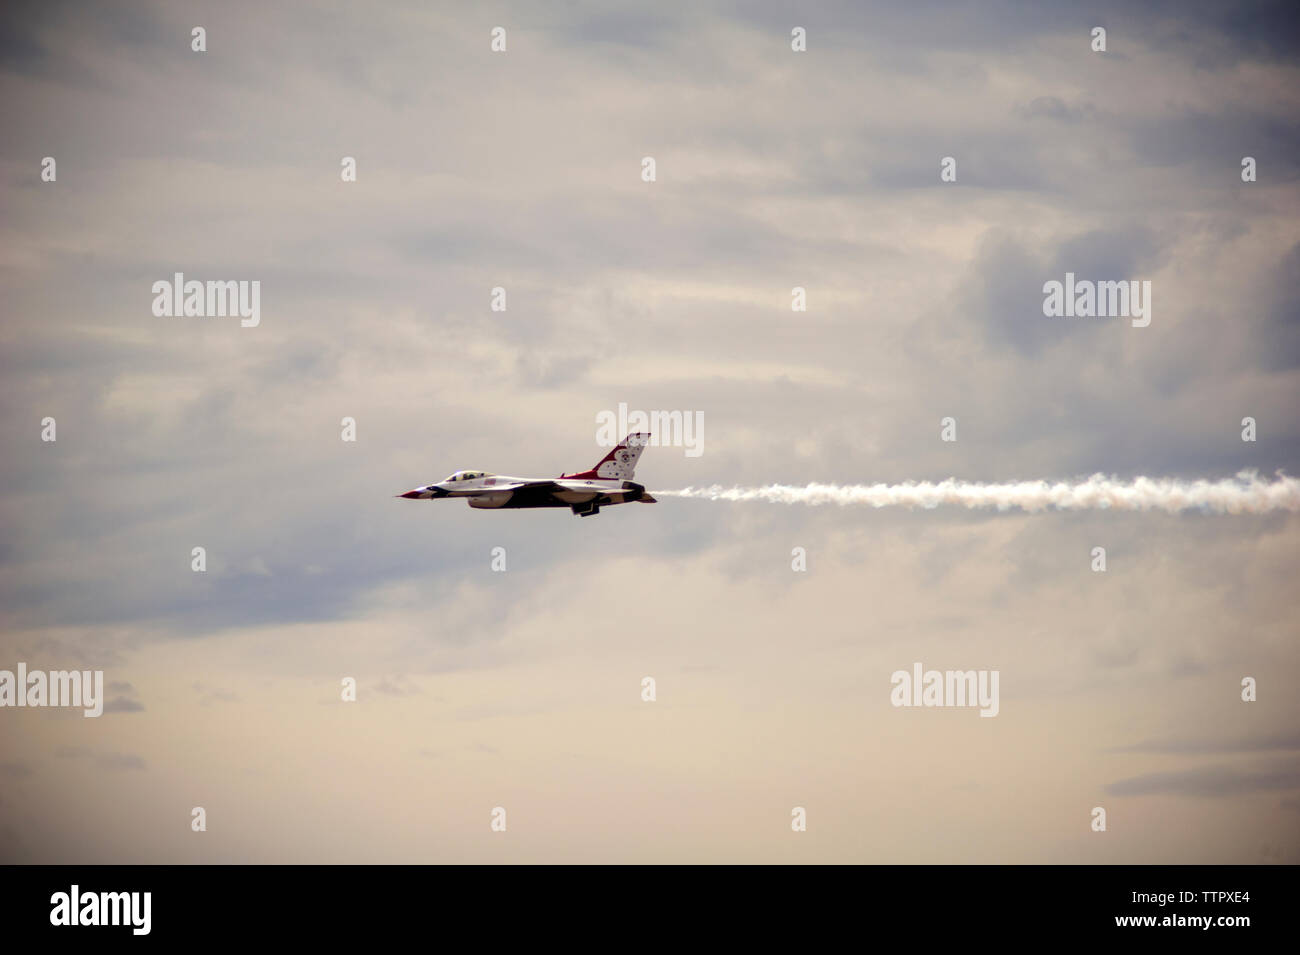 Low angle view of fighter plane flying in cloudy sky Stock Photo